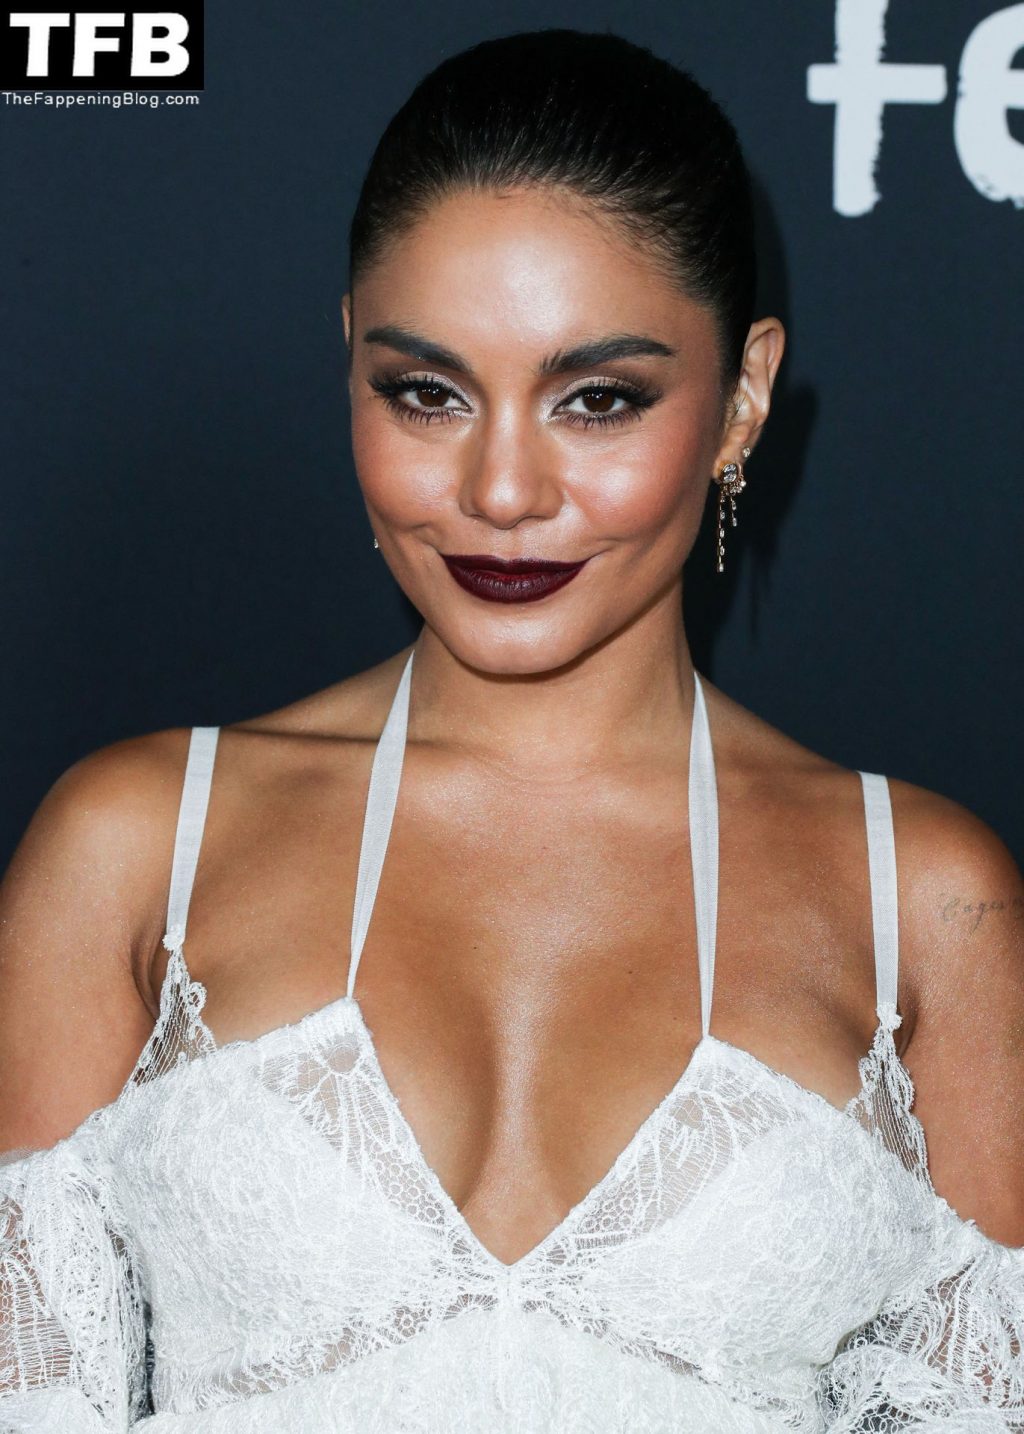 Vanessa Hudgens Flaunts Her Sexy Tits at the Netflix’s “tick, tick…BOOM” Premiere in Hollywood (150 Photos)